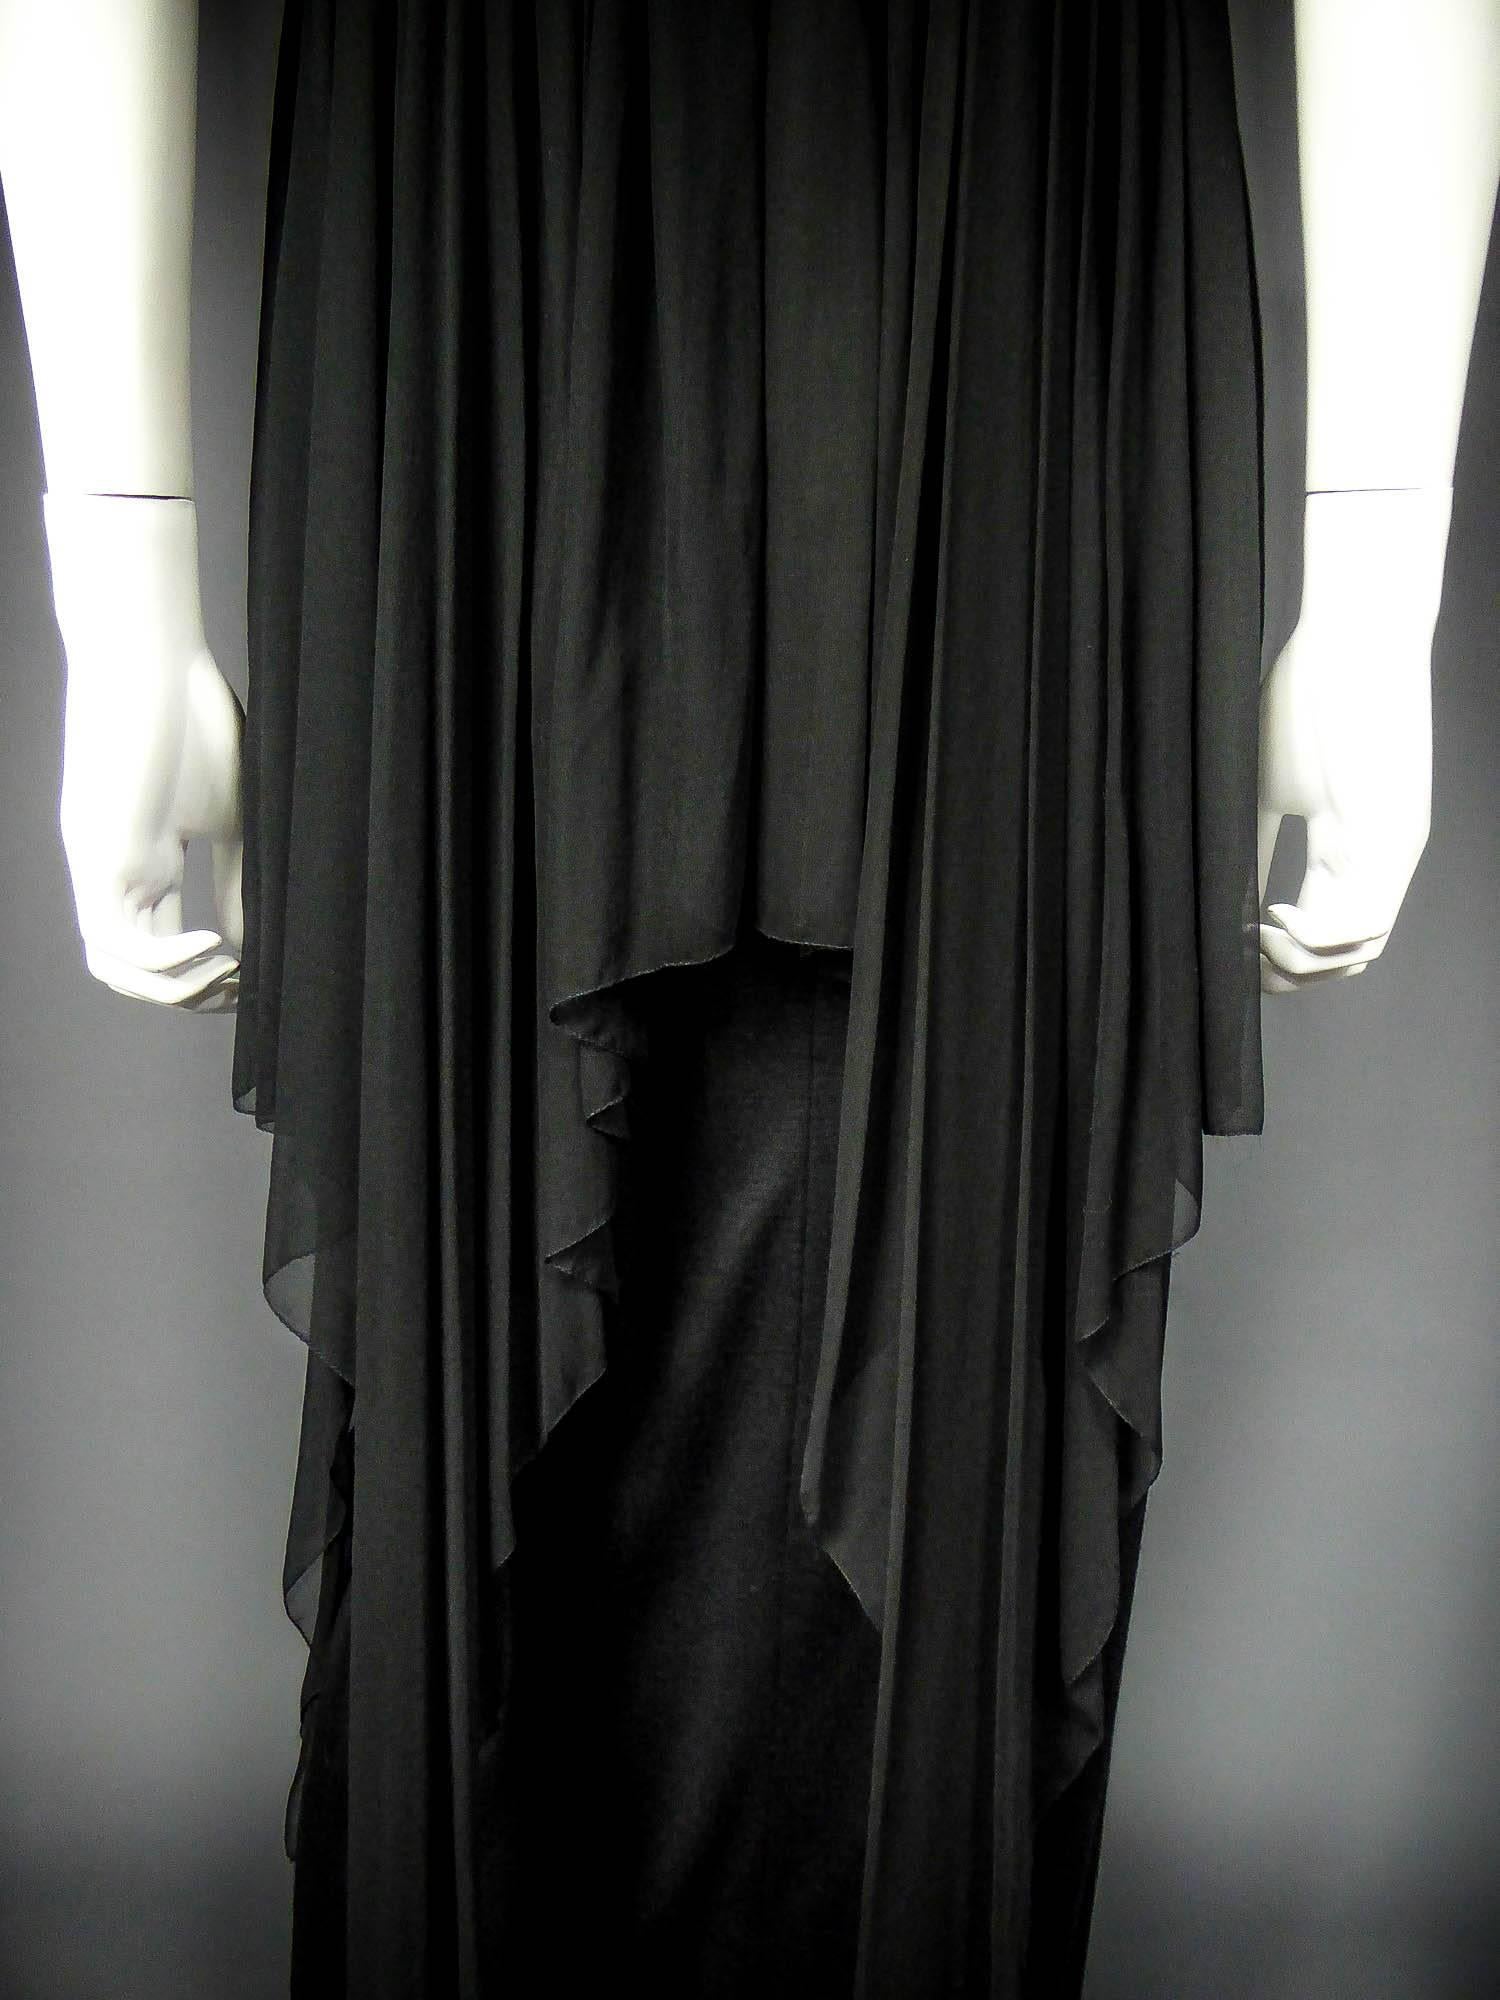 Women's A Christian Dior Haute Couture Evening Dress by Marc Bohan Circa 1975 For Sale